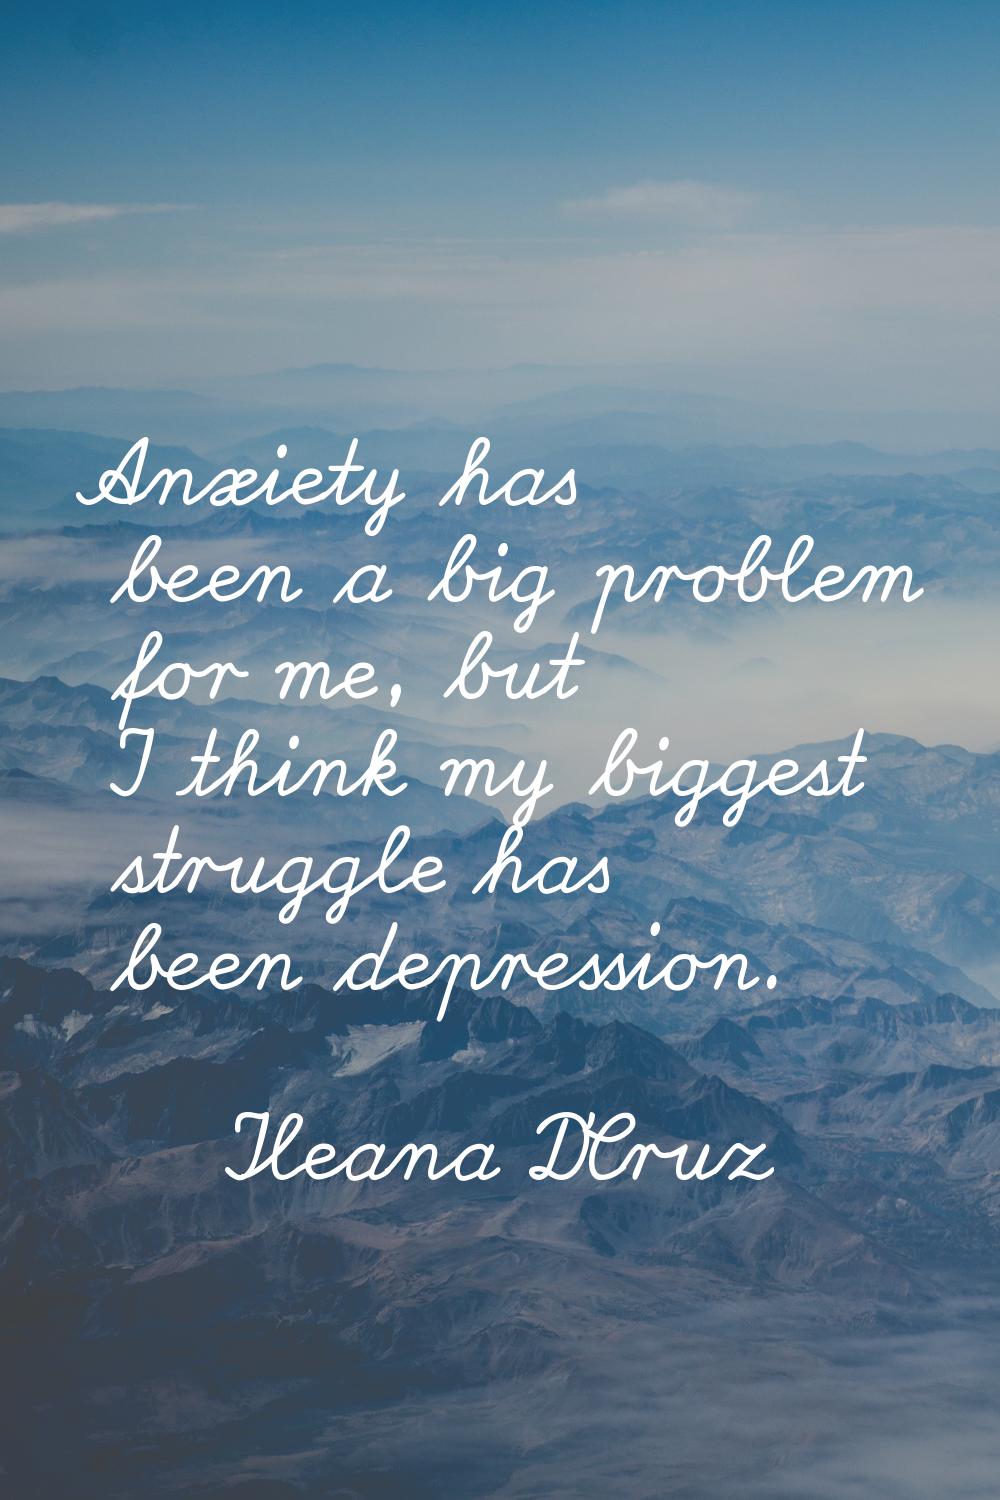 Anxiety has been a big problem for me, but I think my biggest struggle has been depression.